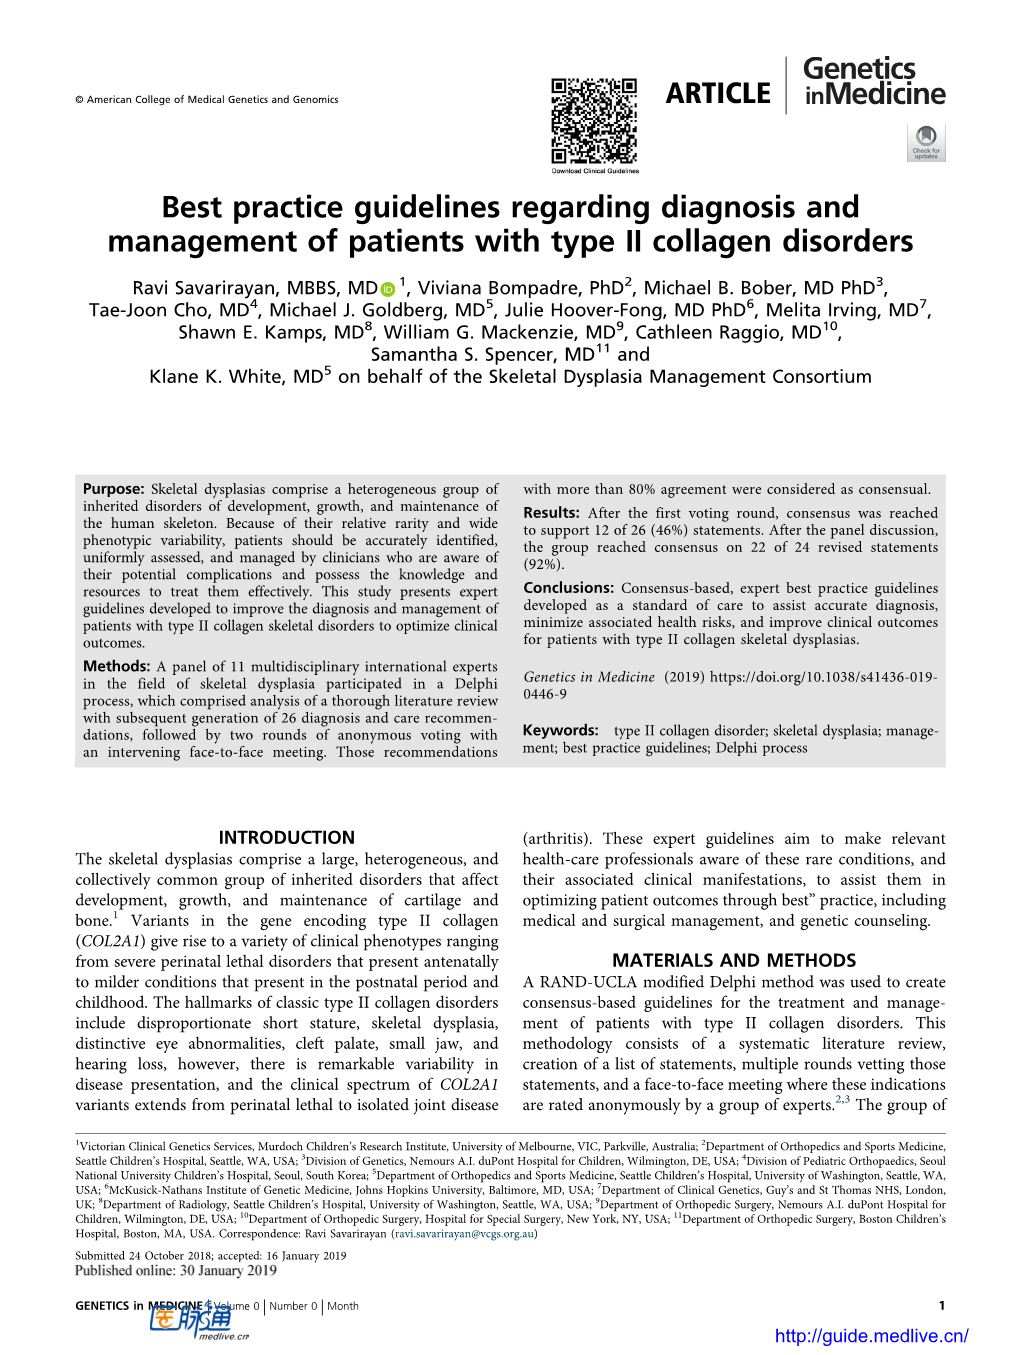 Best Practice Guidelines Regarding Diagnosis and Management of Patients with Type II Collagen Disorders